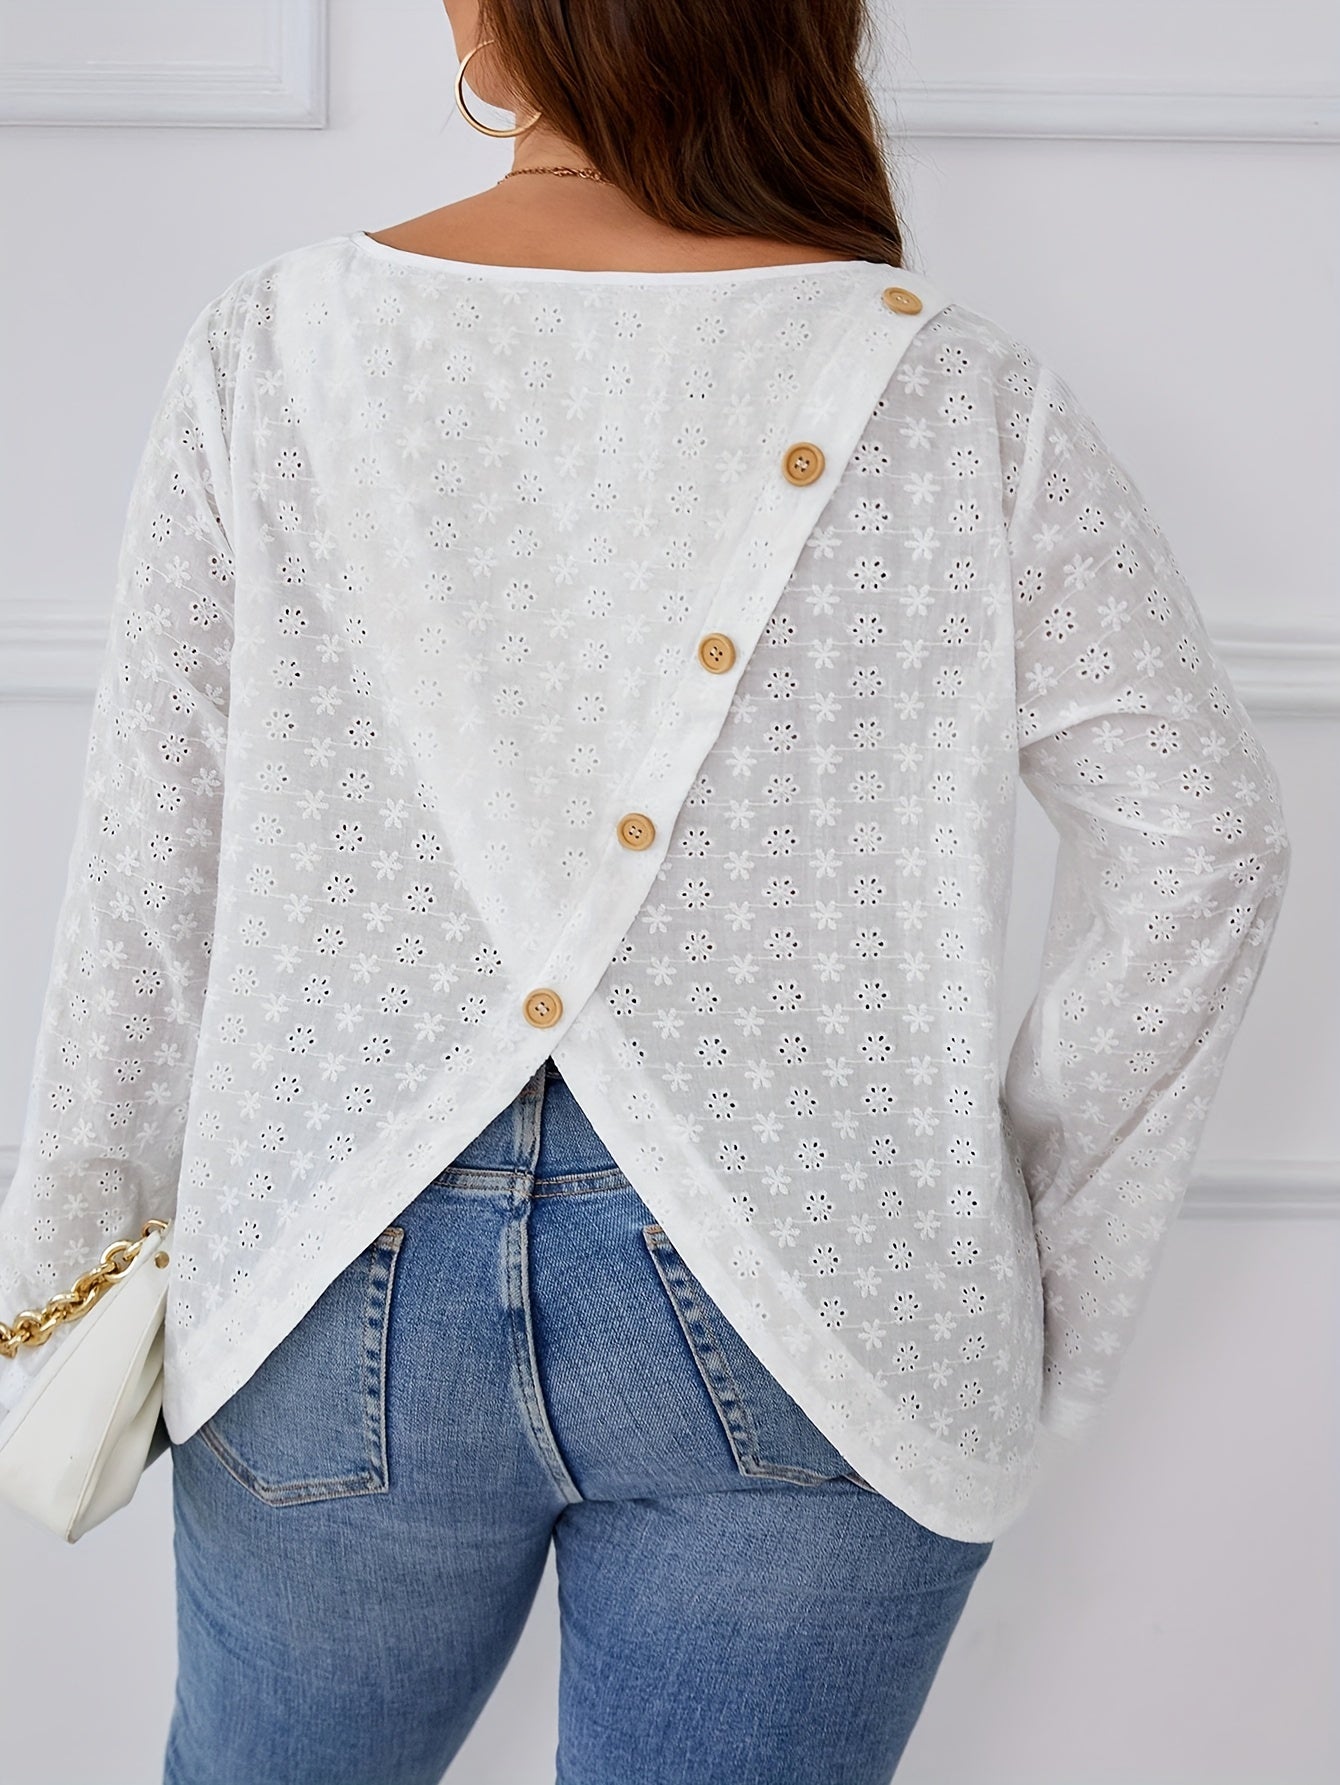 Plus Size Casual Blouse, Women's Plus Solid Eyelet Embroidered Round Neck Long Sleeve Button Decor Top